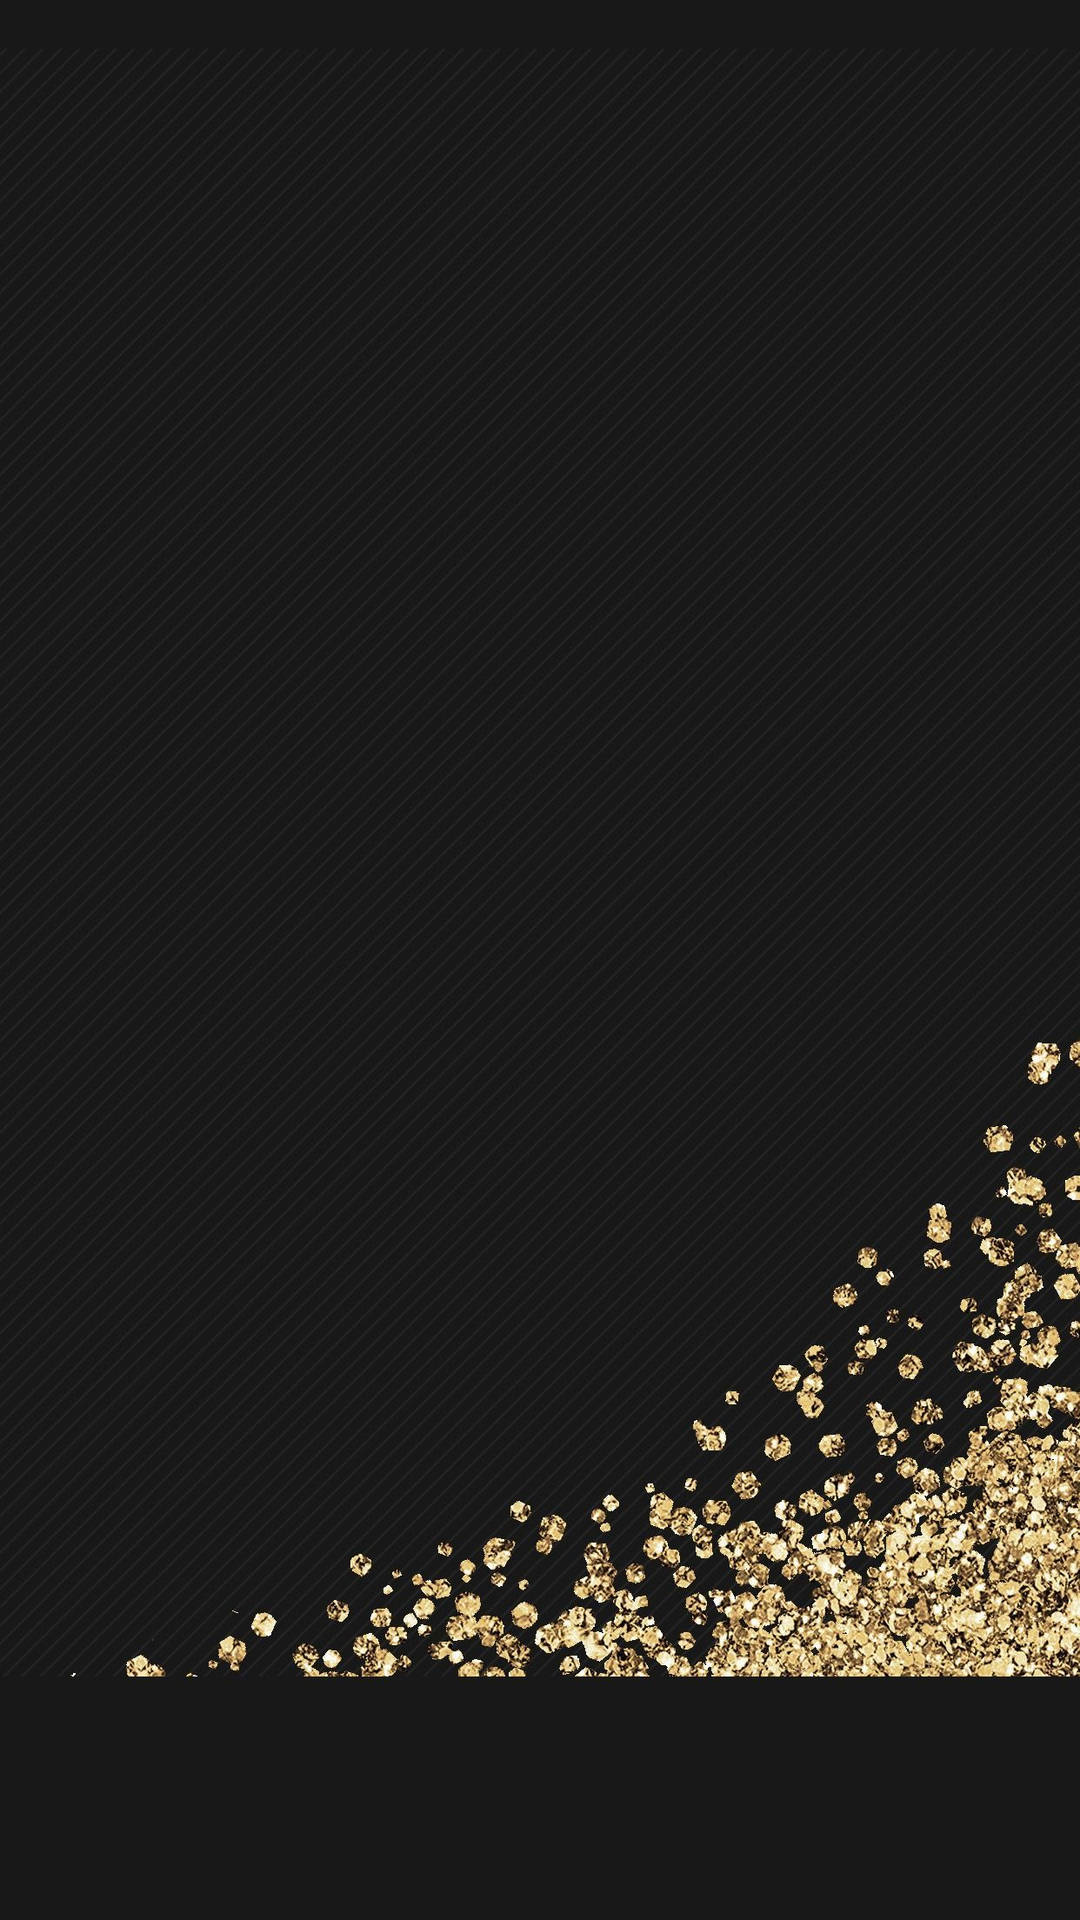 Black Android And Gold Glitters Wallpaper